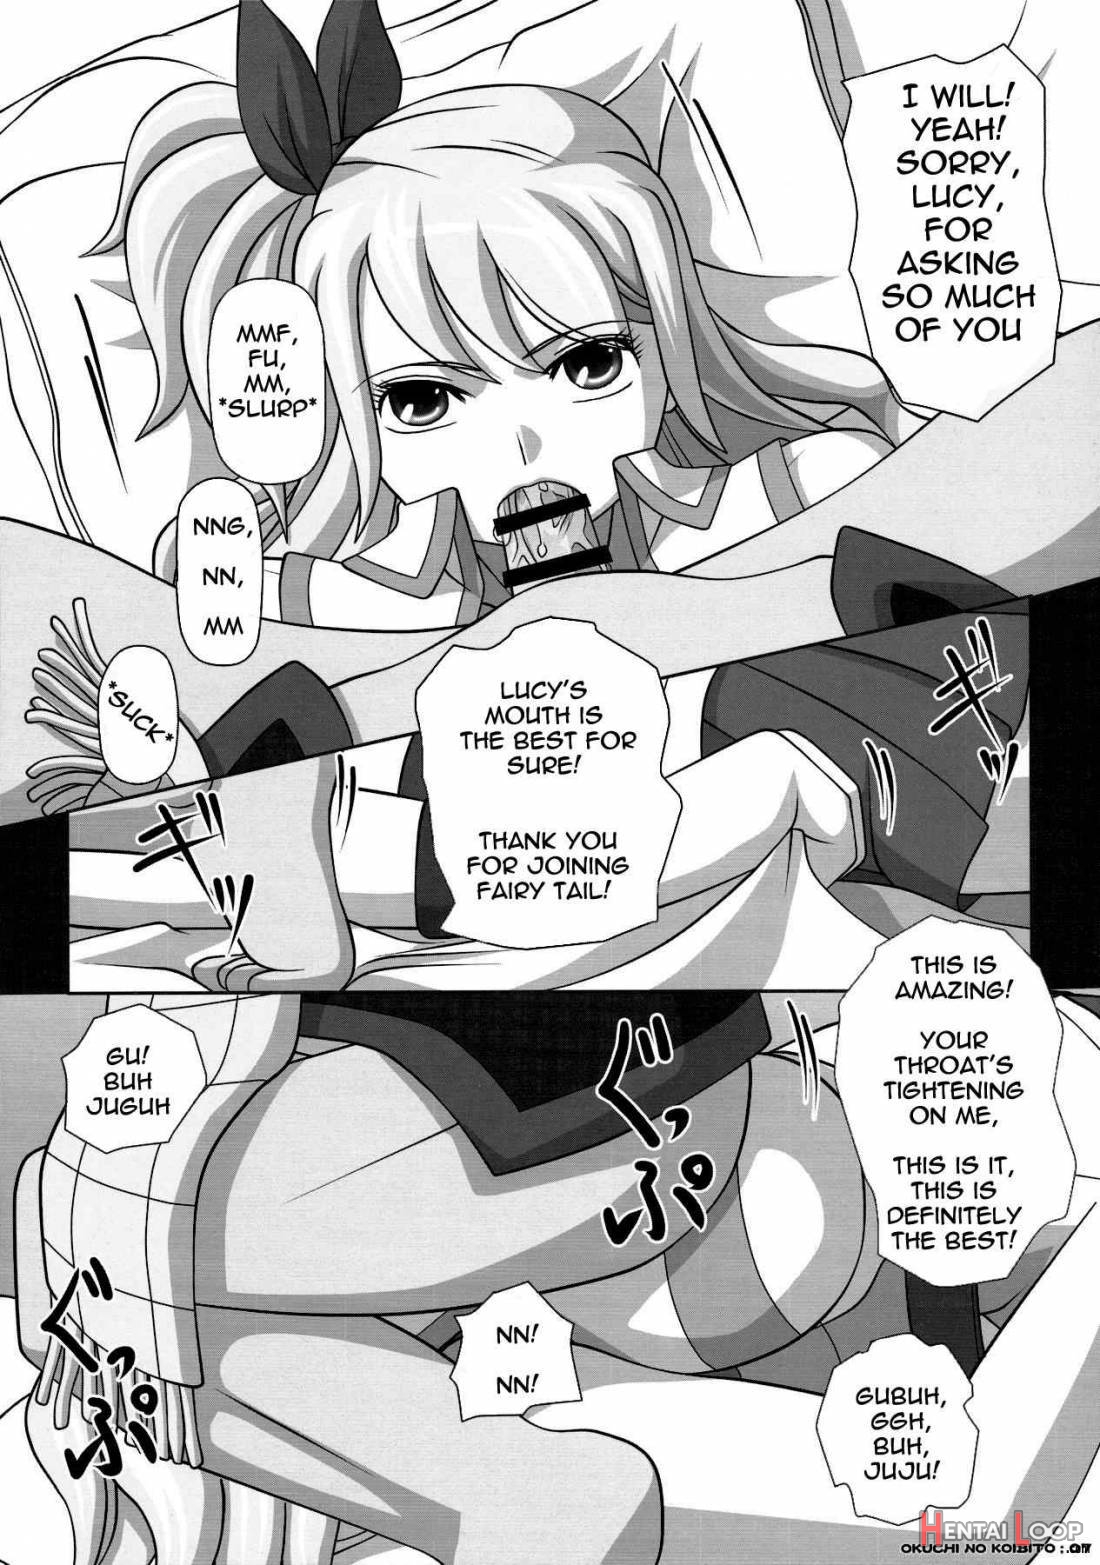 Okuchi No Ehon -lucy To Issho!- page 7